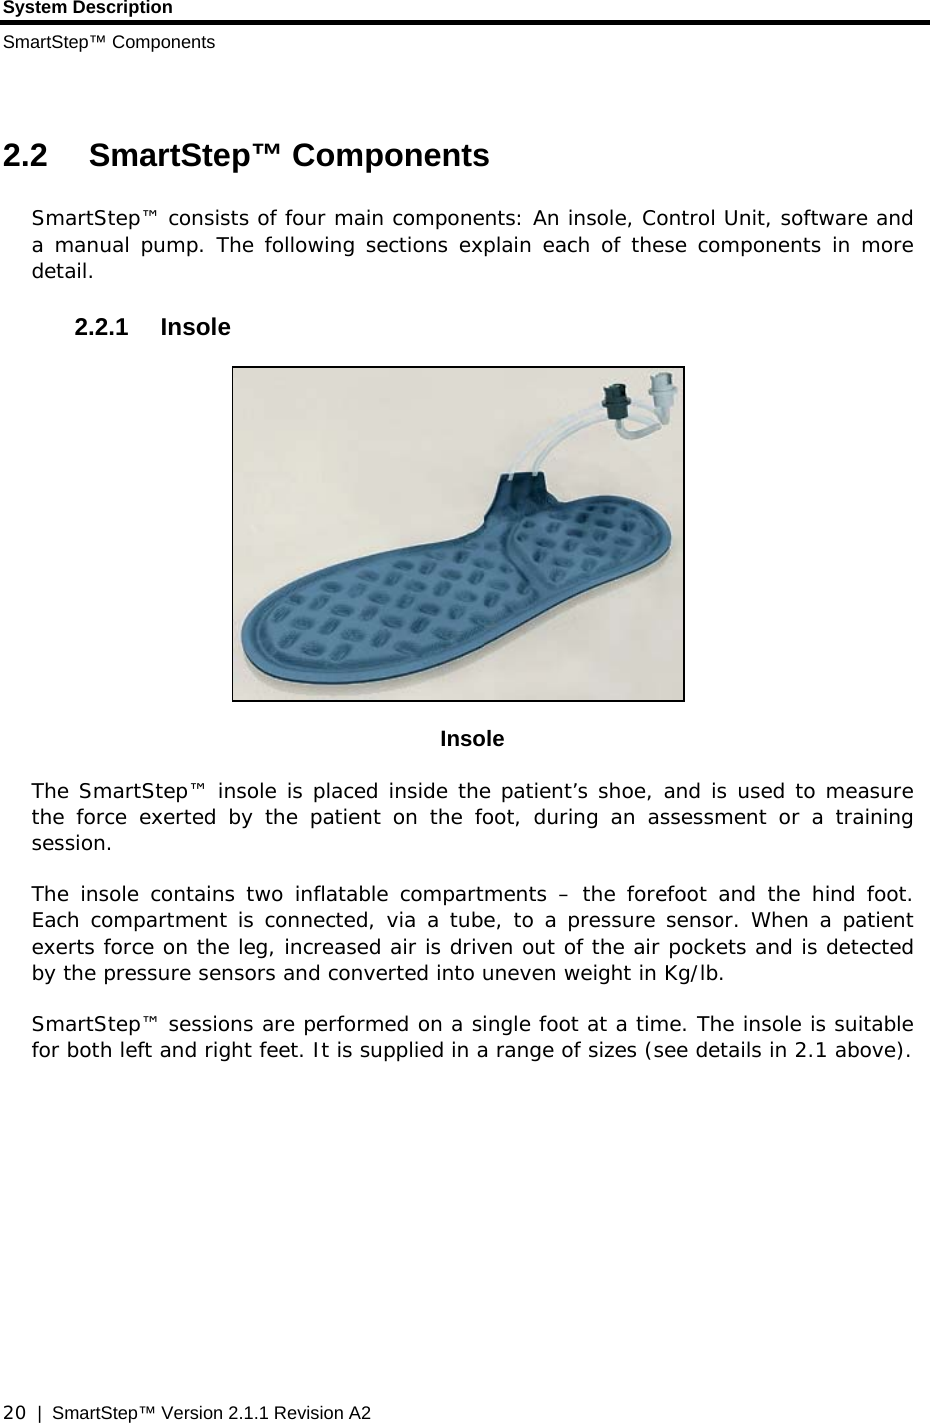 System Description SmartStep™ Components  20  |  SmartStep™ Version 2.1.1 Revision A2  2.2 SmartStep™ Components SmartStep™ consists of four main components: An insole, Control Unit, software and a manual pump. The following sections explain each of these components in more detail. 2.2.1 Insole  Insole The SmartStep™ insole is placed inside the patient’s shoe, and is used to measure the force exerted by the patient on the foot, during an assessment or a training session.  The insole contains two inflatable compartments – the forefoot and the hind foot. Each compartment is connected, via a tube, to a pressure sensor. When a patient exerts force on the leg, increased air is driven out of the air pockets and is detected by the pressure sensors and converted into uneven weight in Kg/lb. SmartStep™ sessions are performed on a single foot at a time. The insole is suitable for both left and right feet. It is supplied in a range of sizes (see details in 2.1 above).     